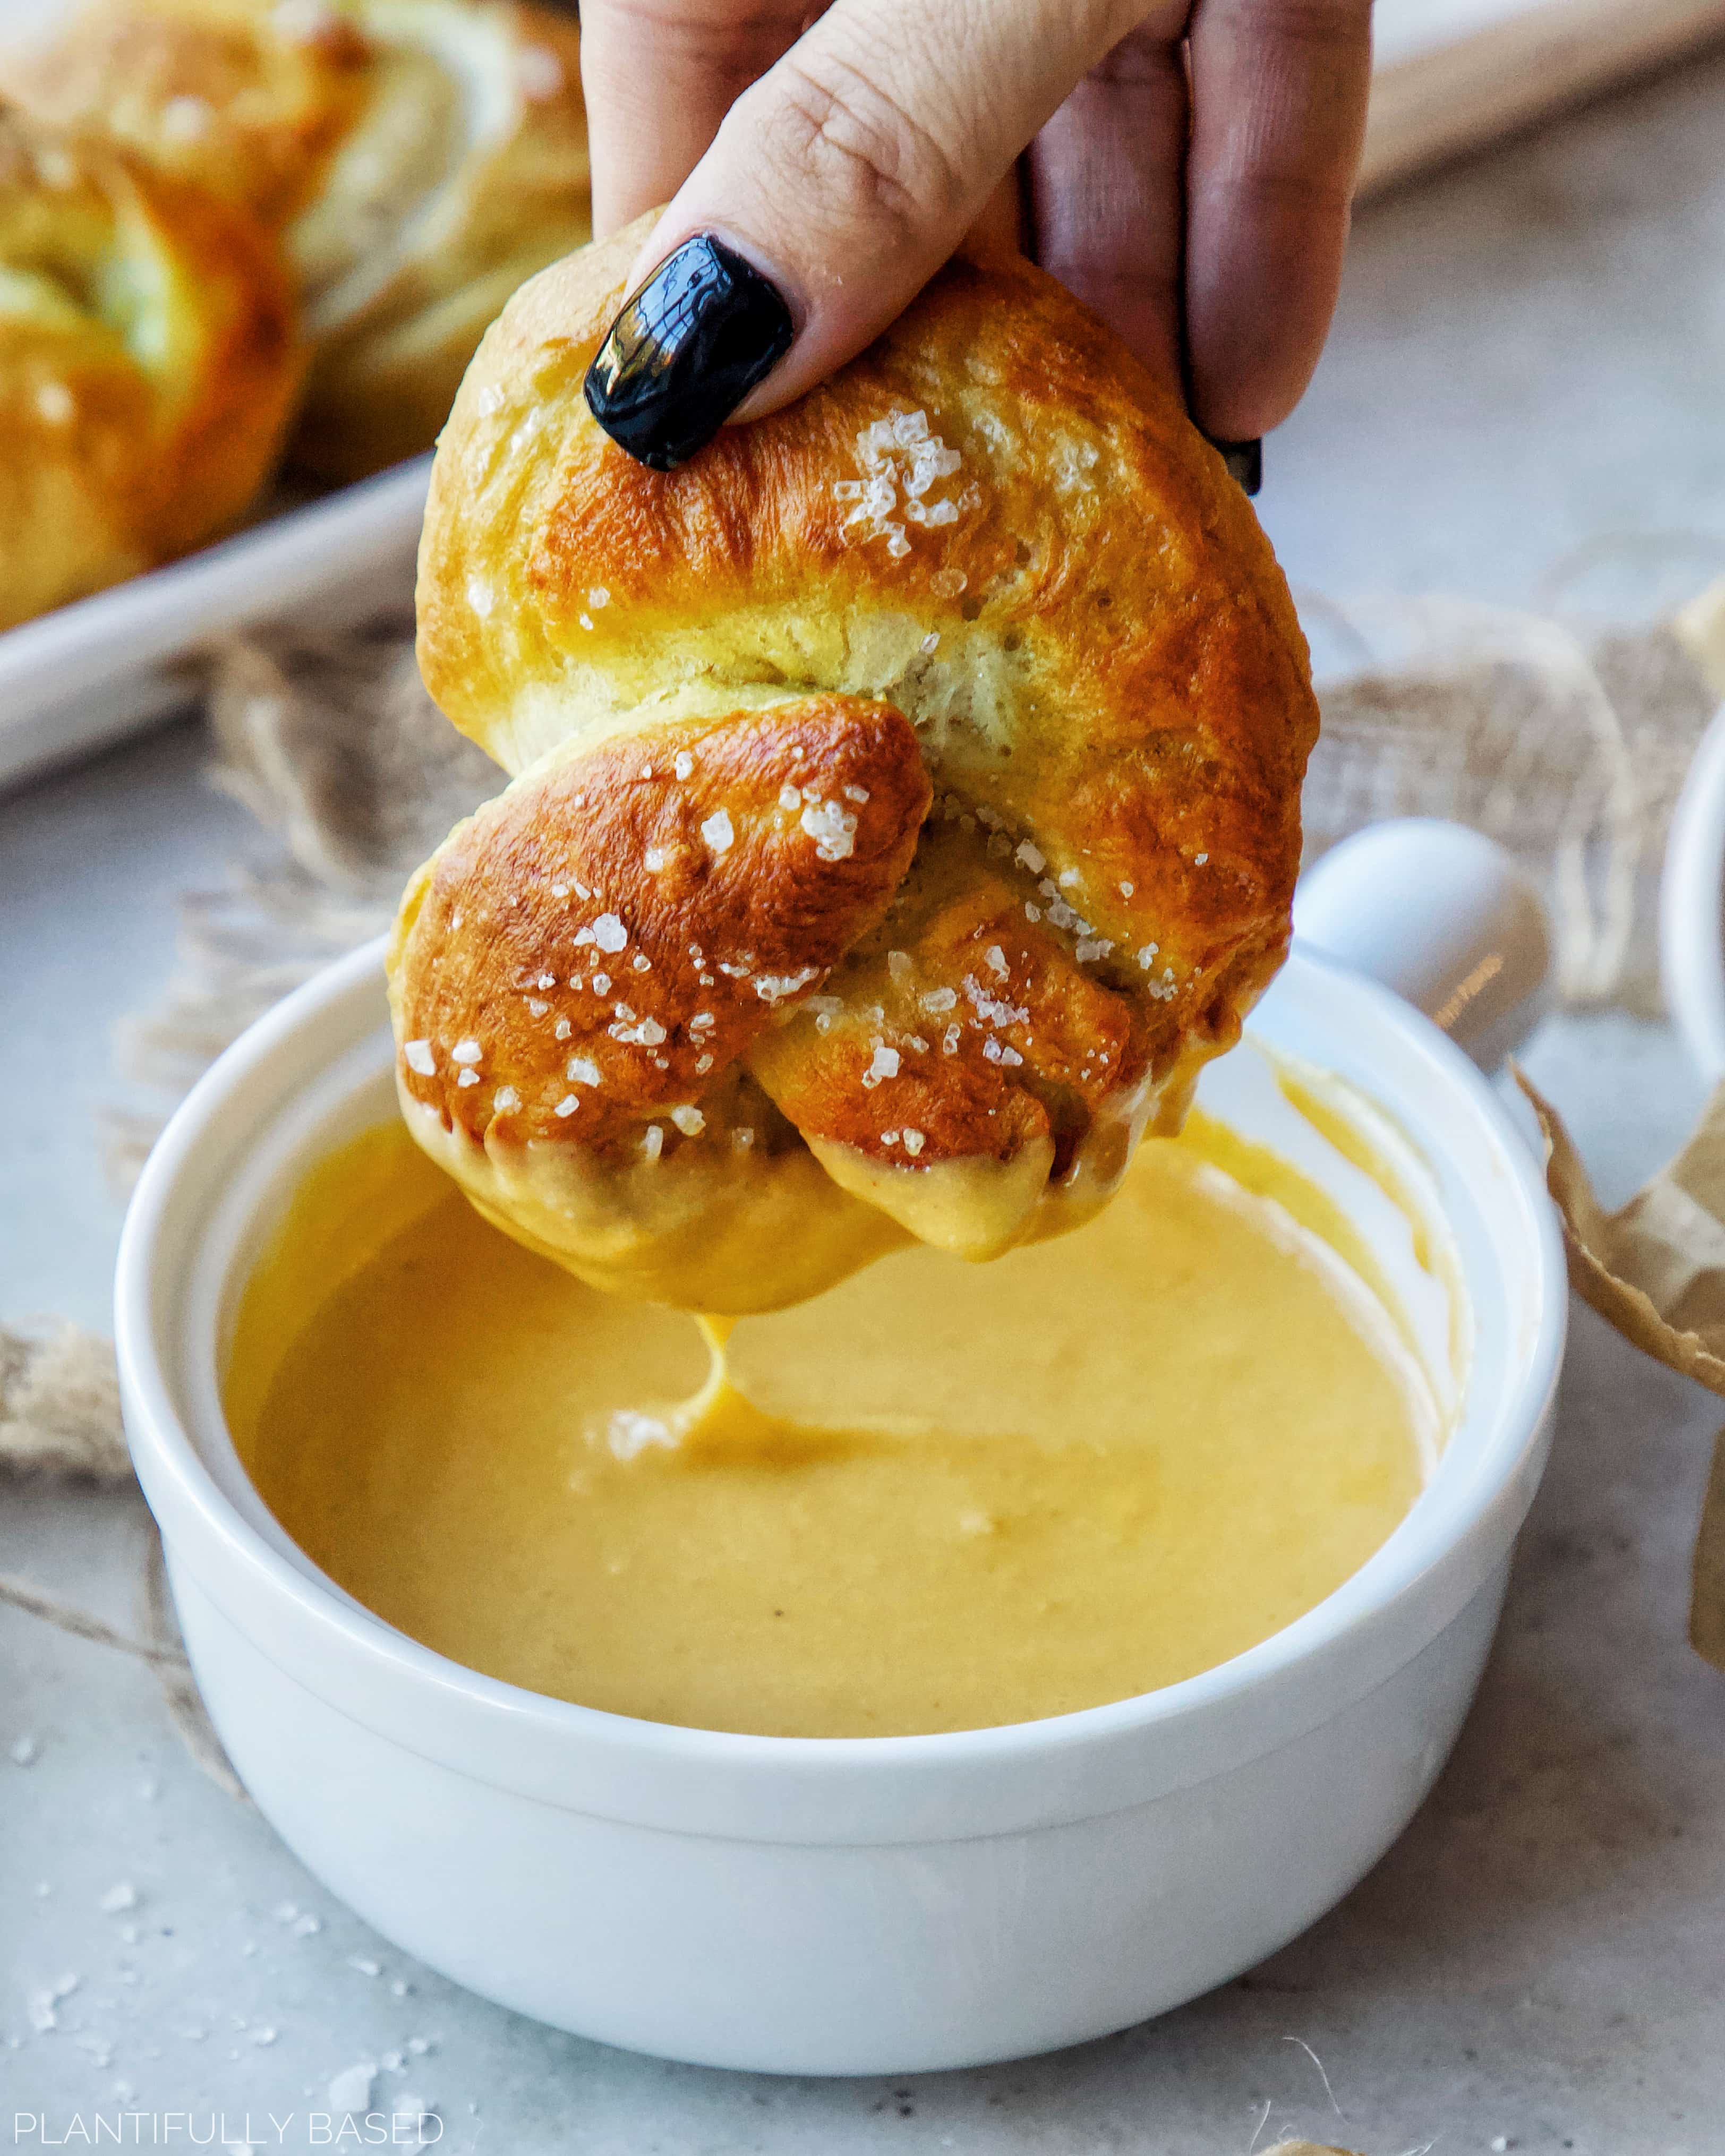 Homemade Soft Pretzels with Vegan Cheese Sauce - Plantifully Based